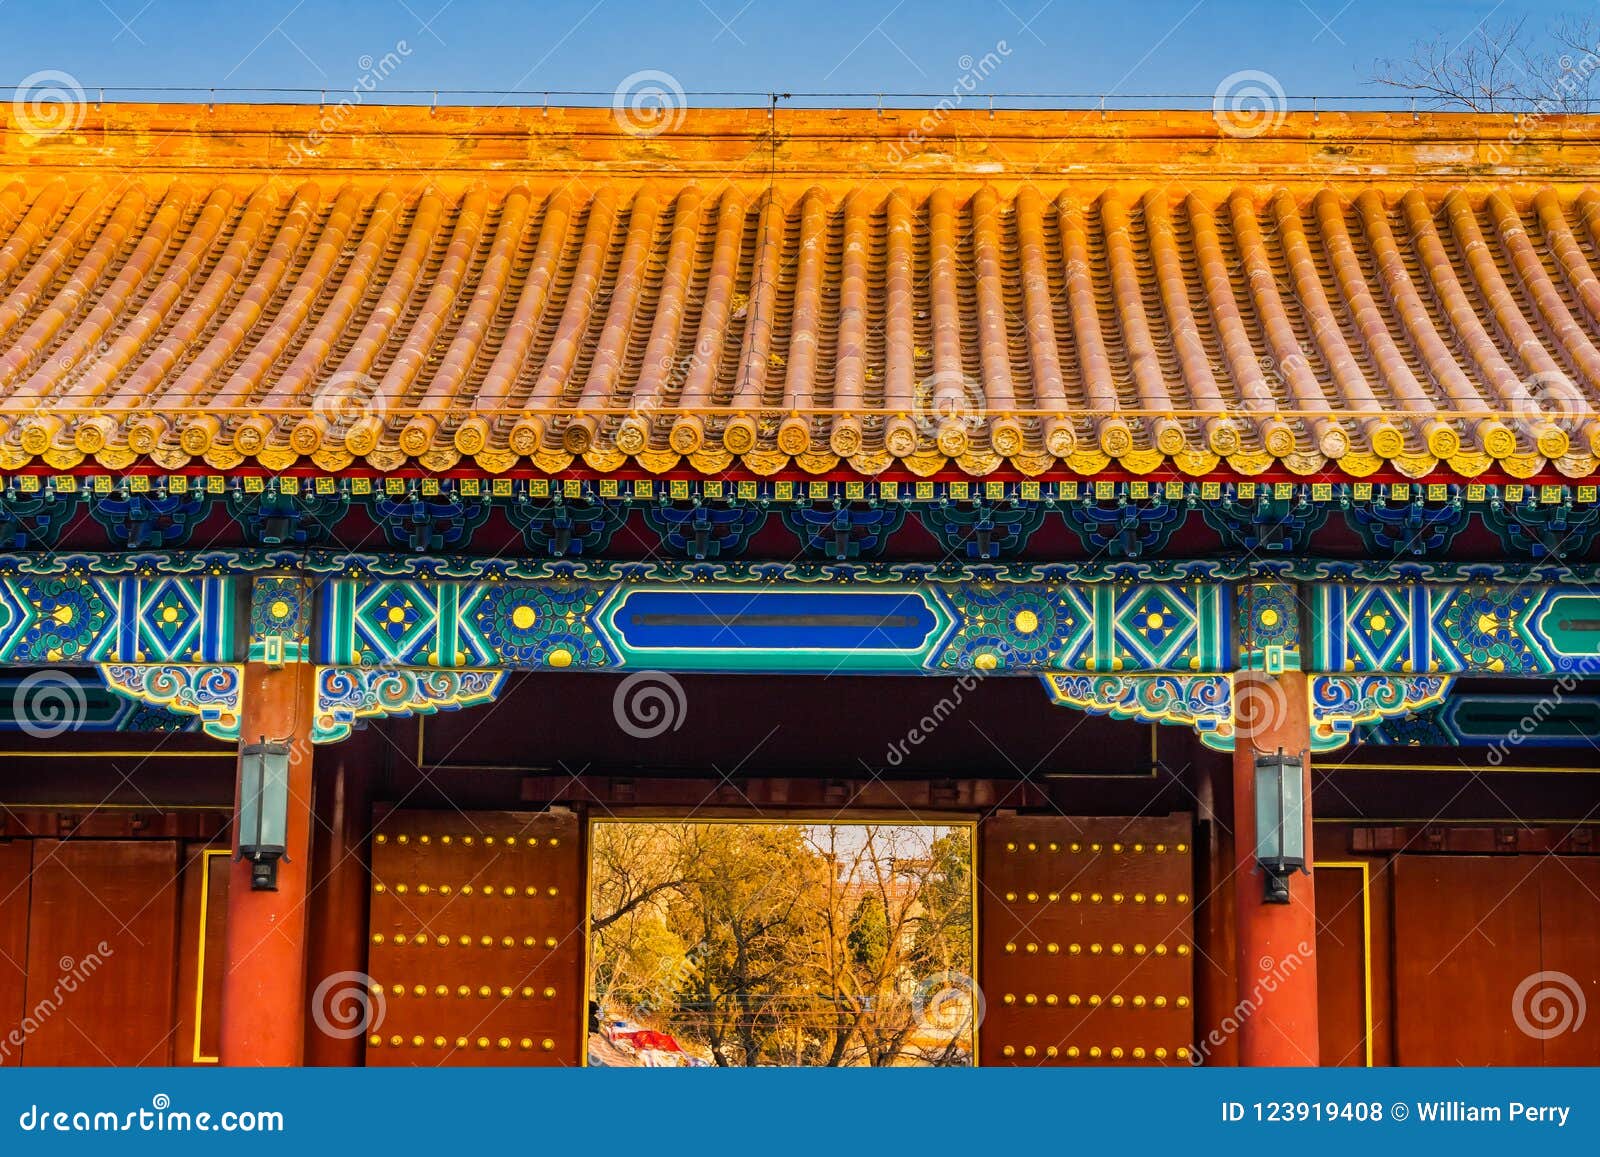 south entrance red gate lions jingshan park beijing china